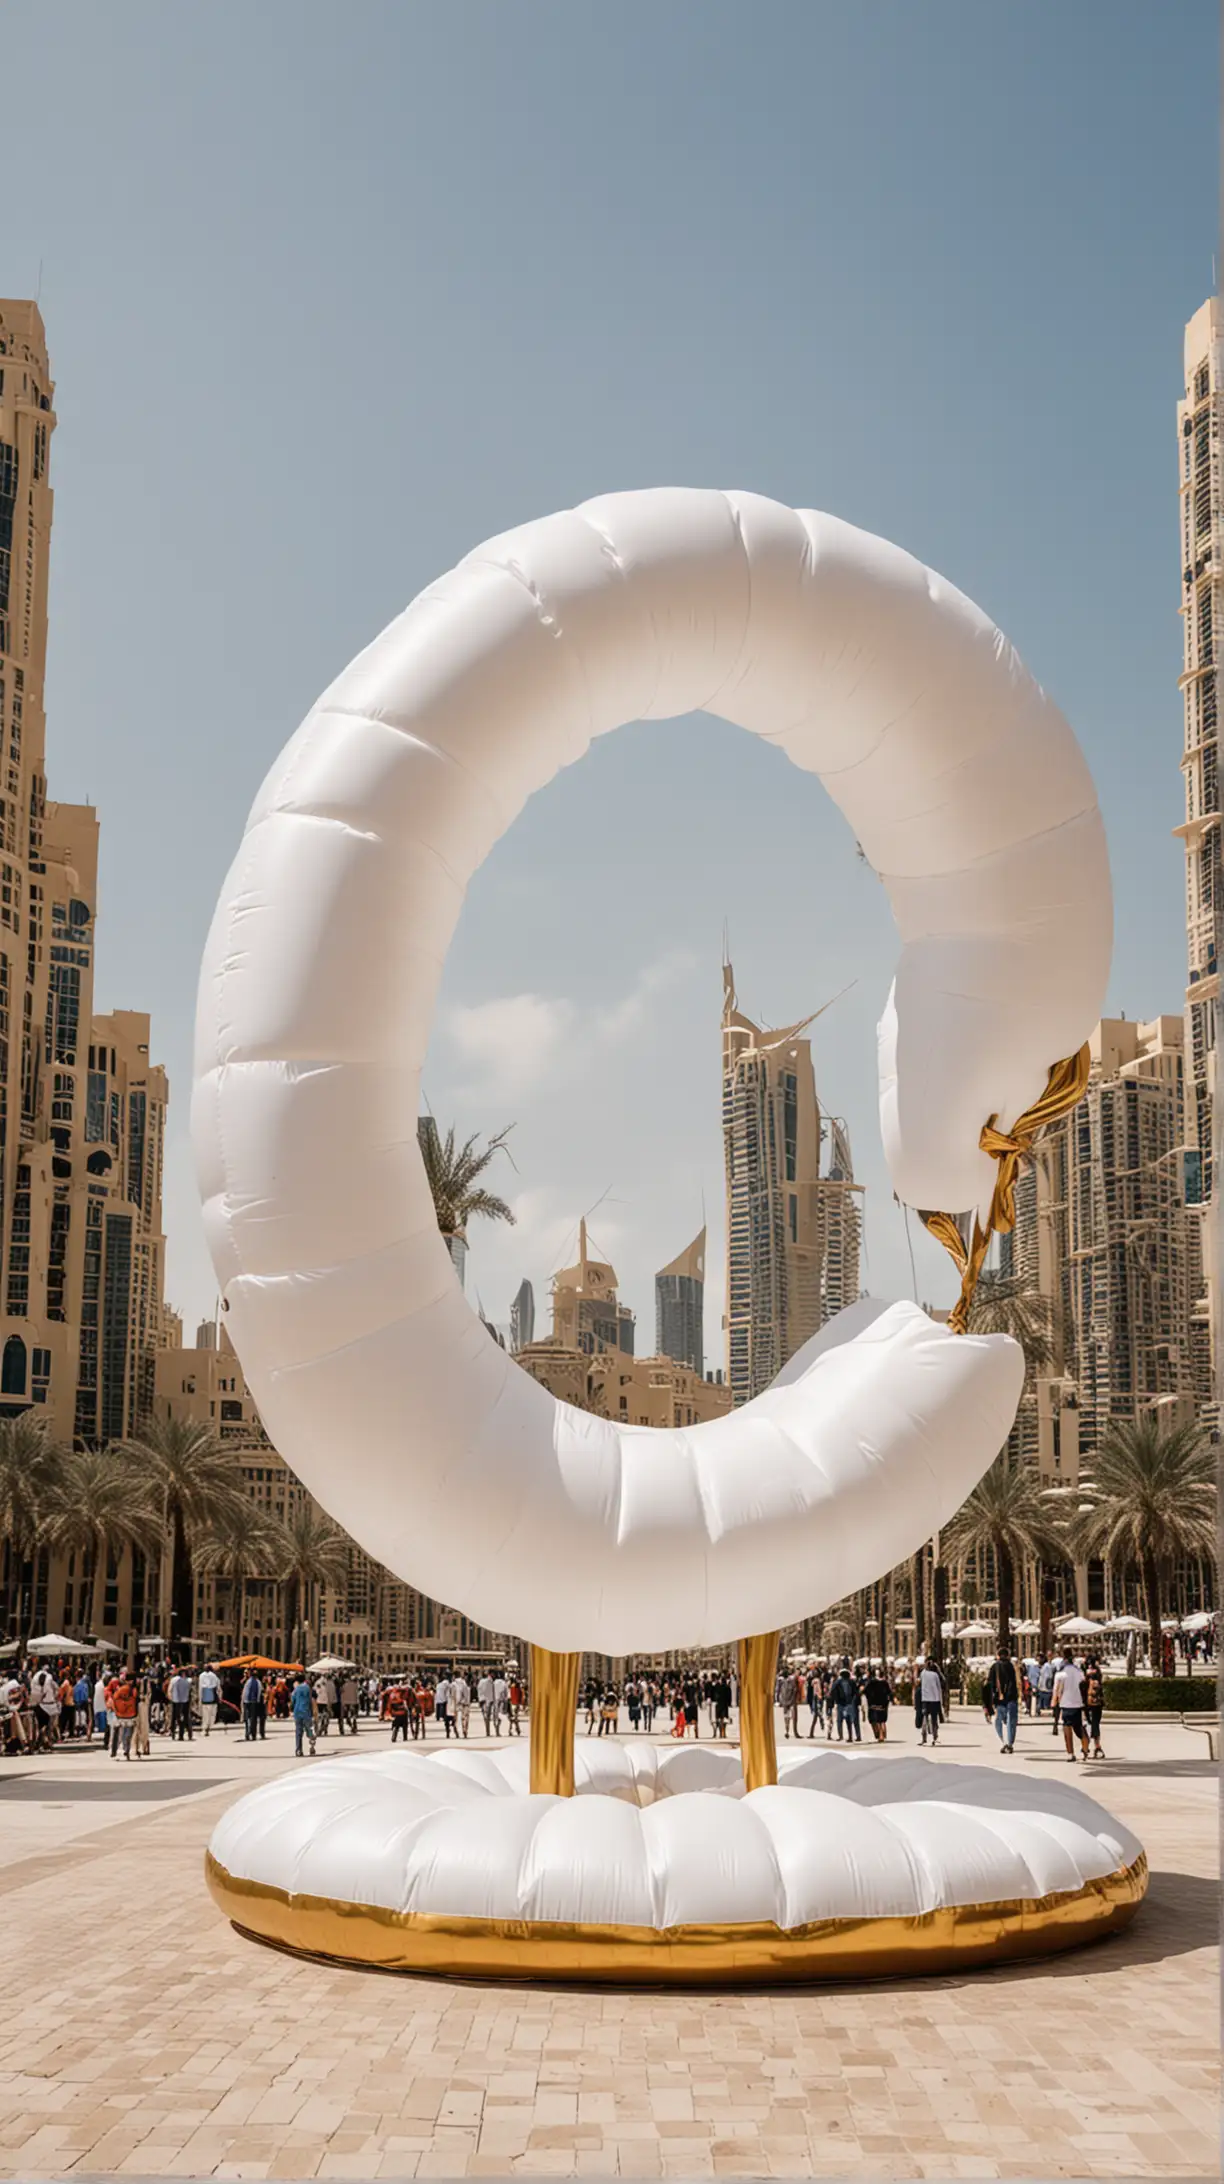 Golden Inflatable Sculpture in Dubais Center with White Clouds